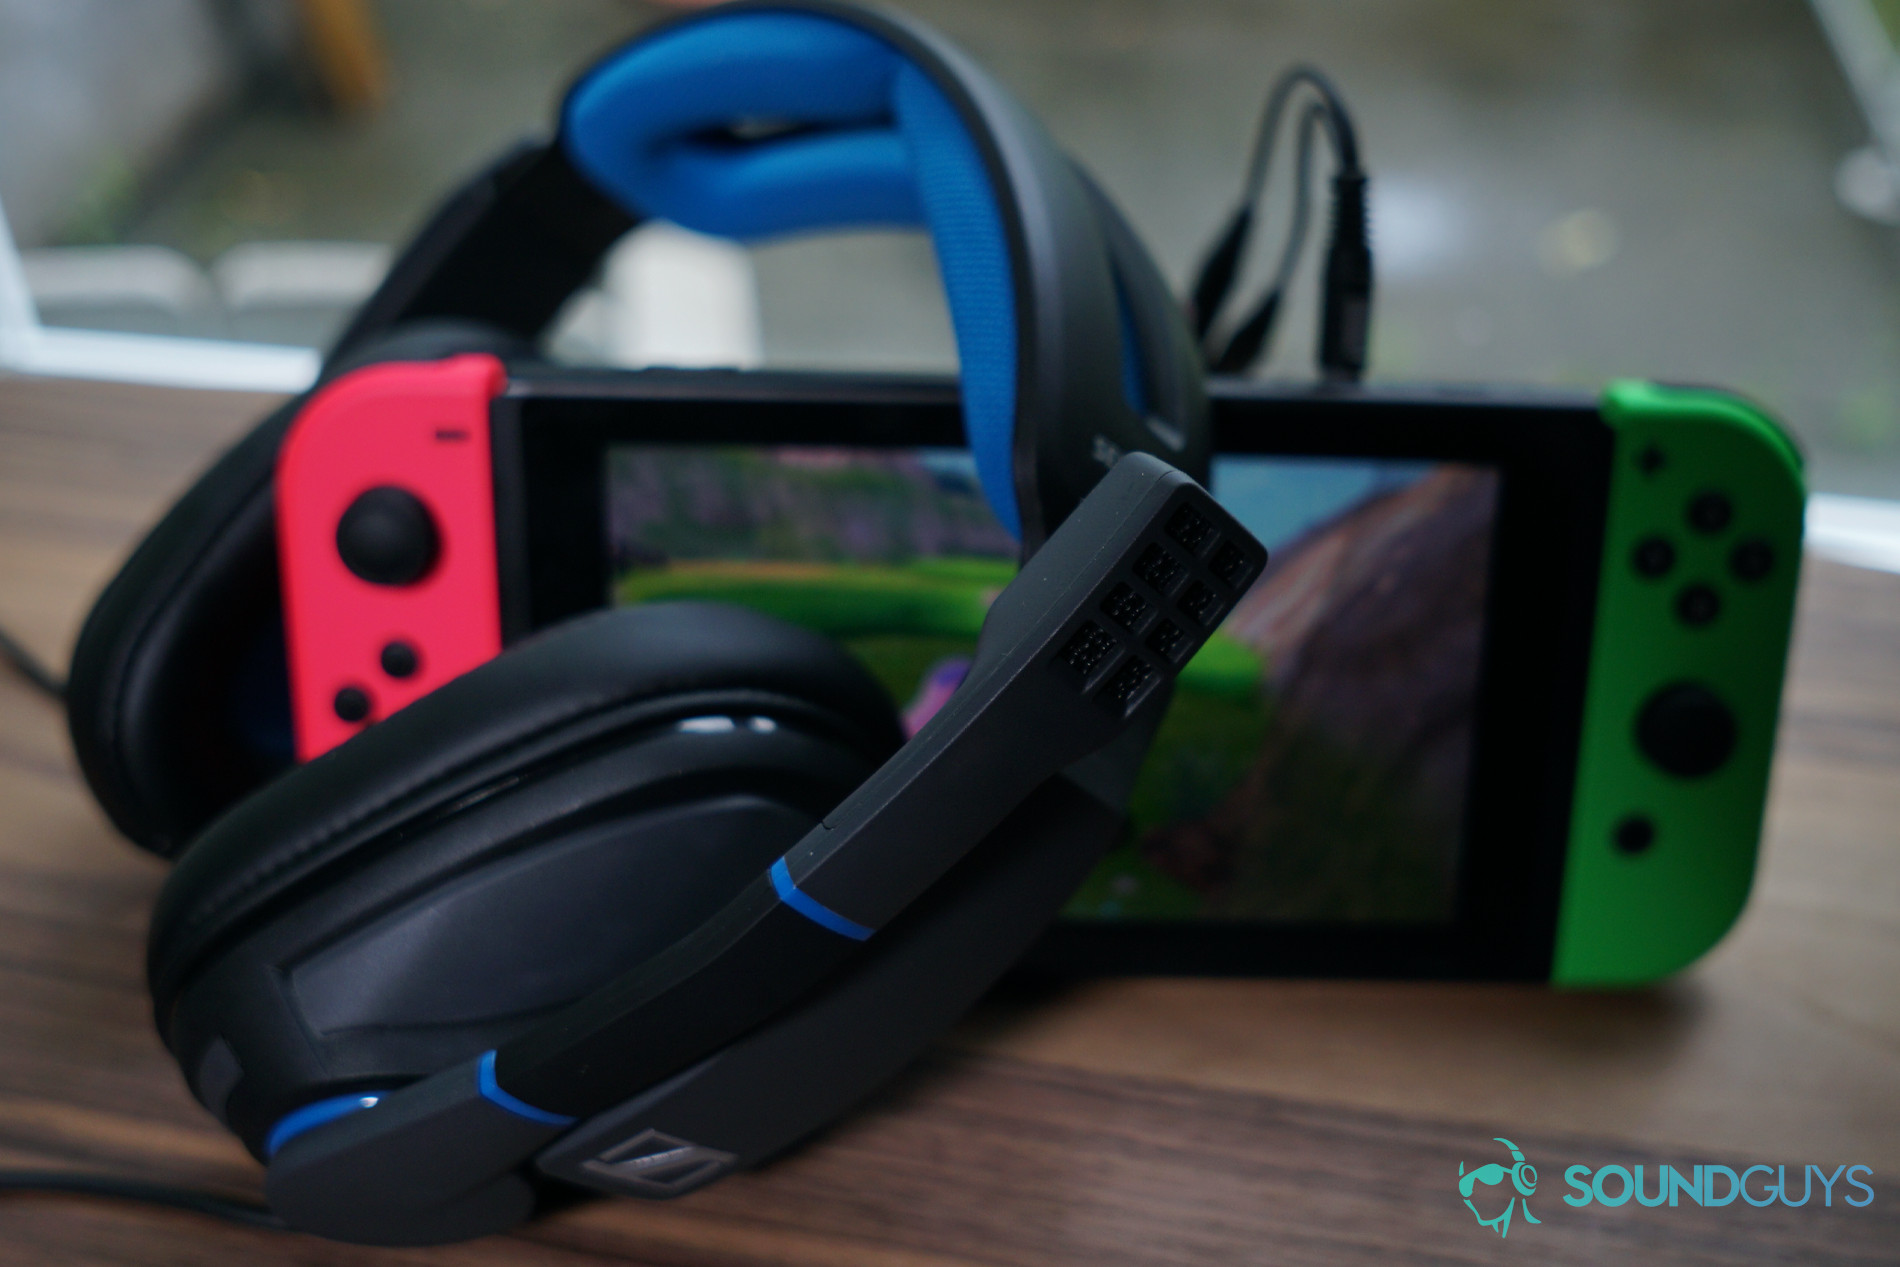 The Sennheiser GSP 300 gaming headset is plugged into a Nintendo Switch running Pokemon Sword.